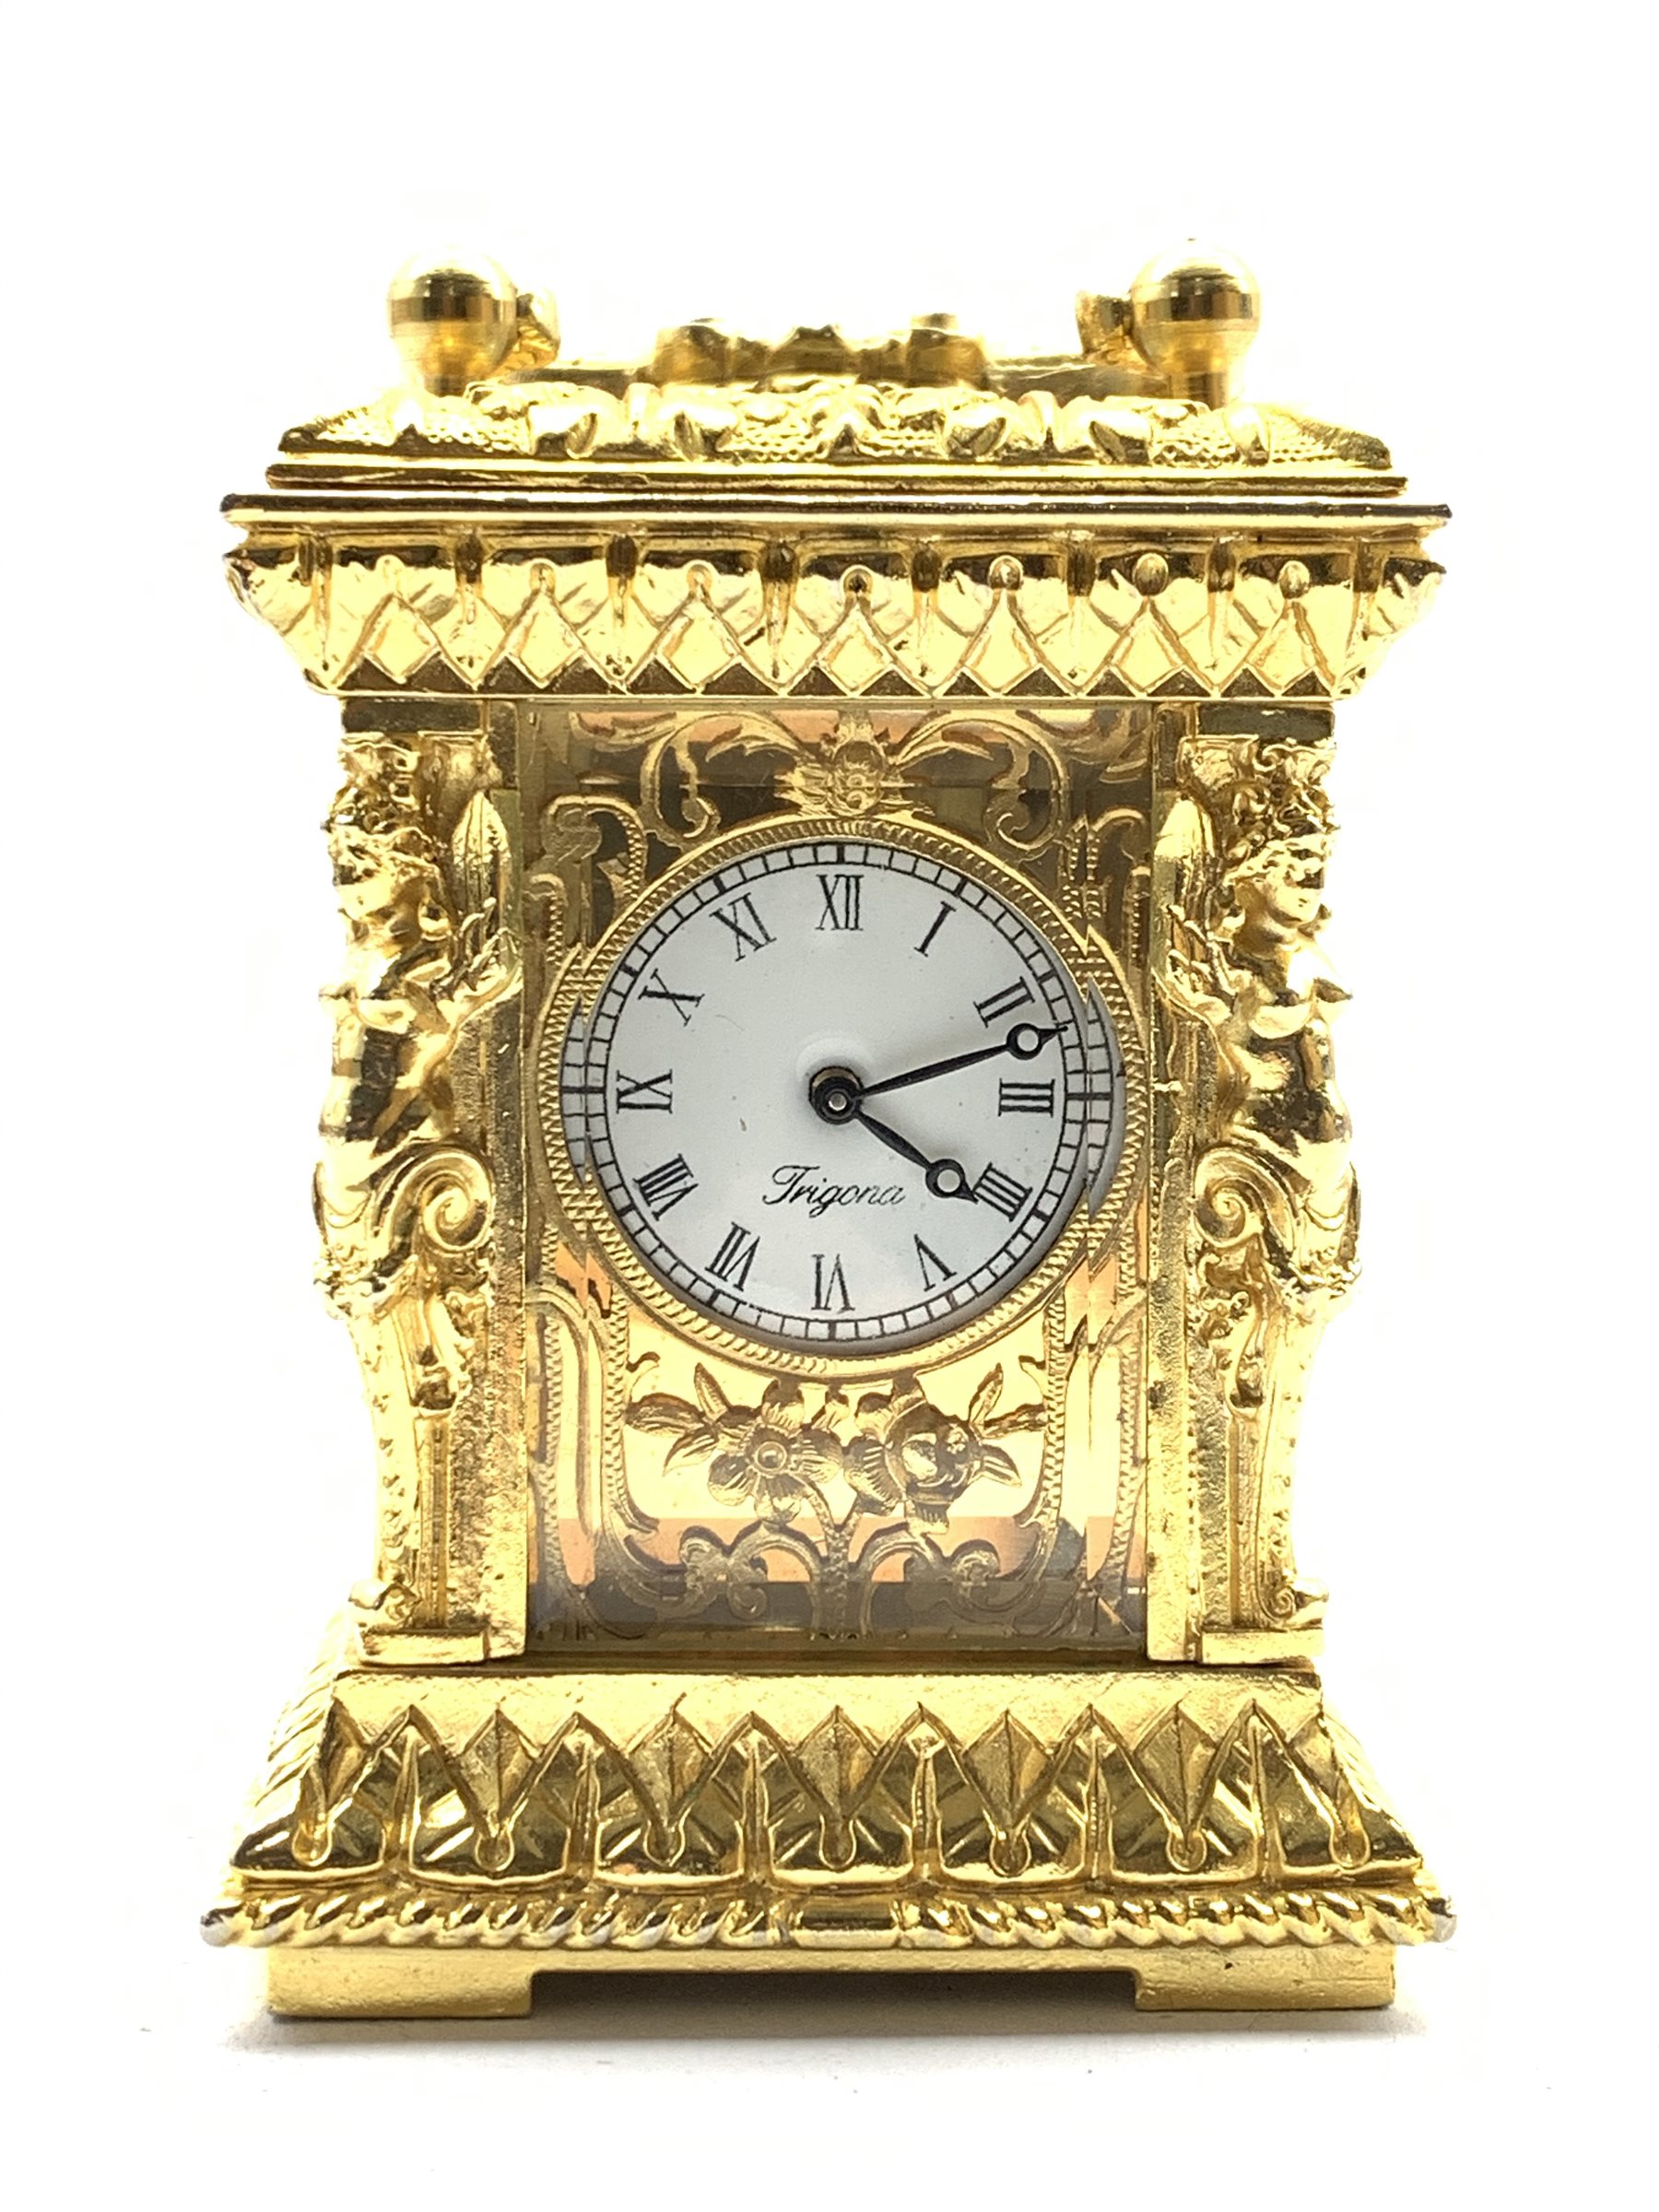 20th century miniature ornate brass carriage time piece, white enamel dial with Roman numeral chapt